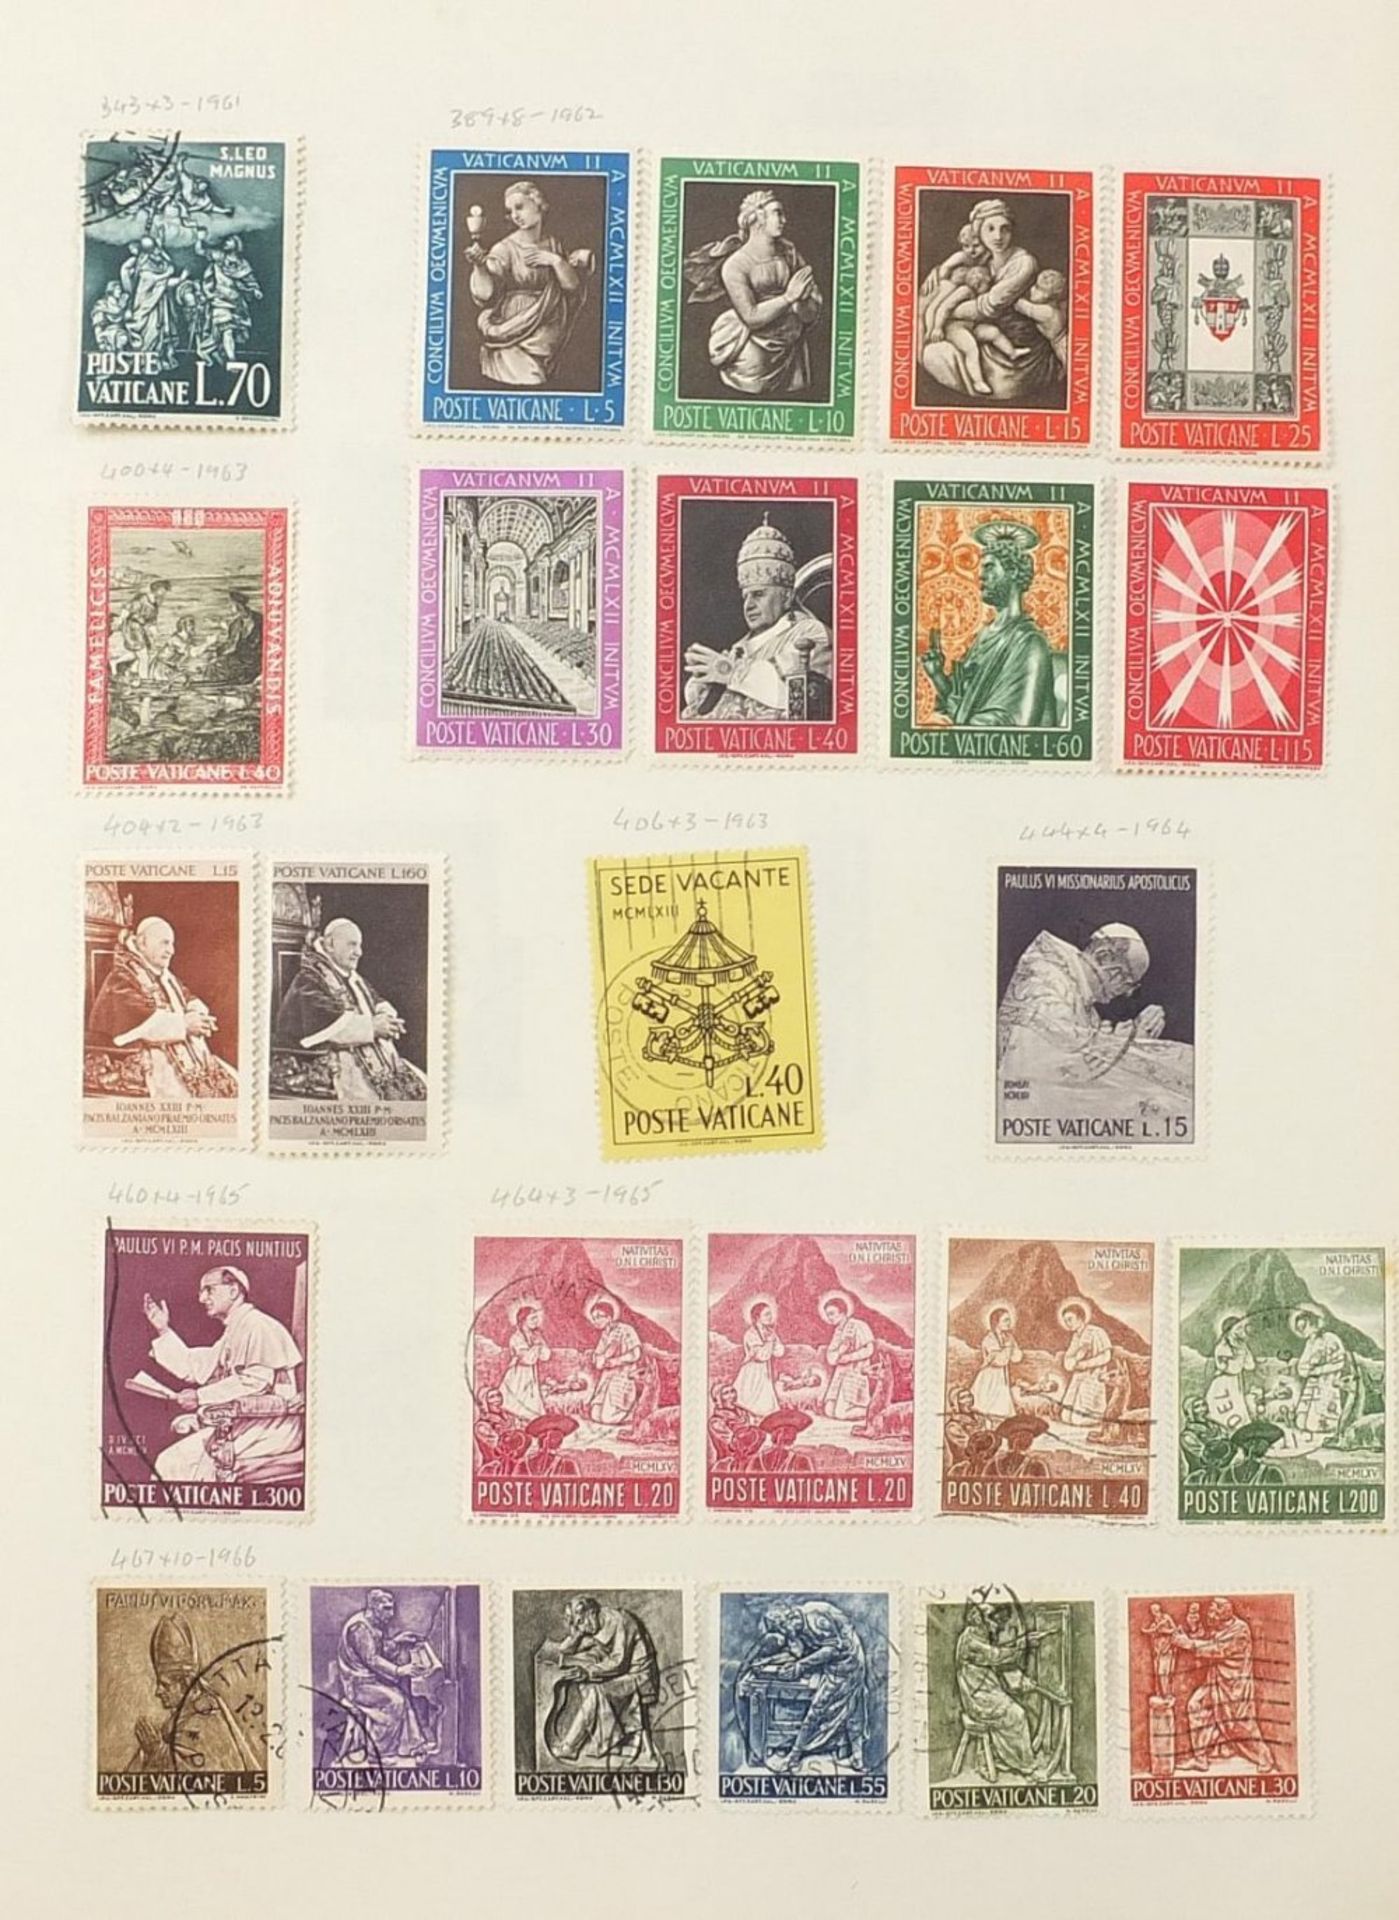 Extensive collection of antique and later world stamps arranged in albums including Brazil, - Image 18 of 52